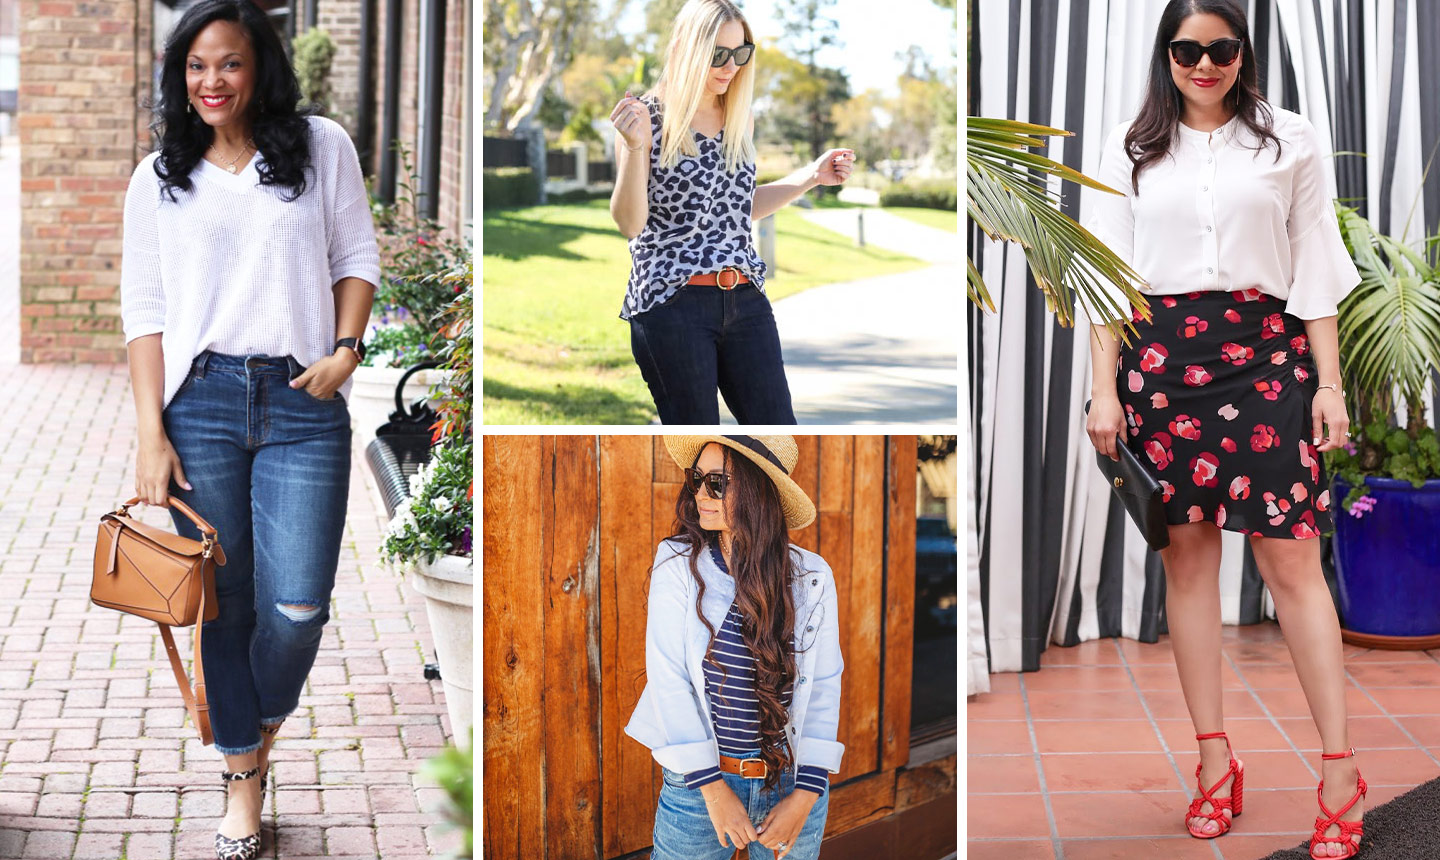 style blog posts that we simply love